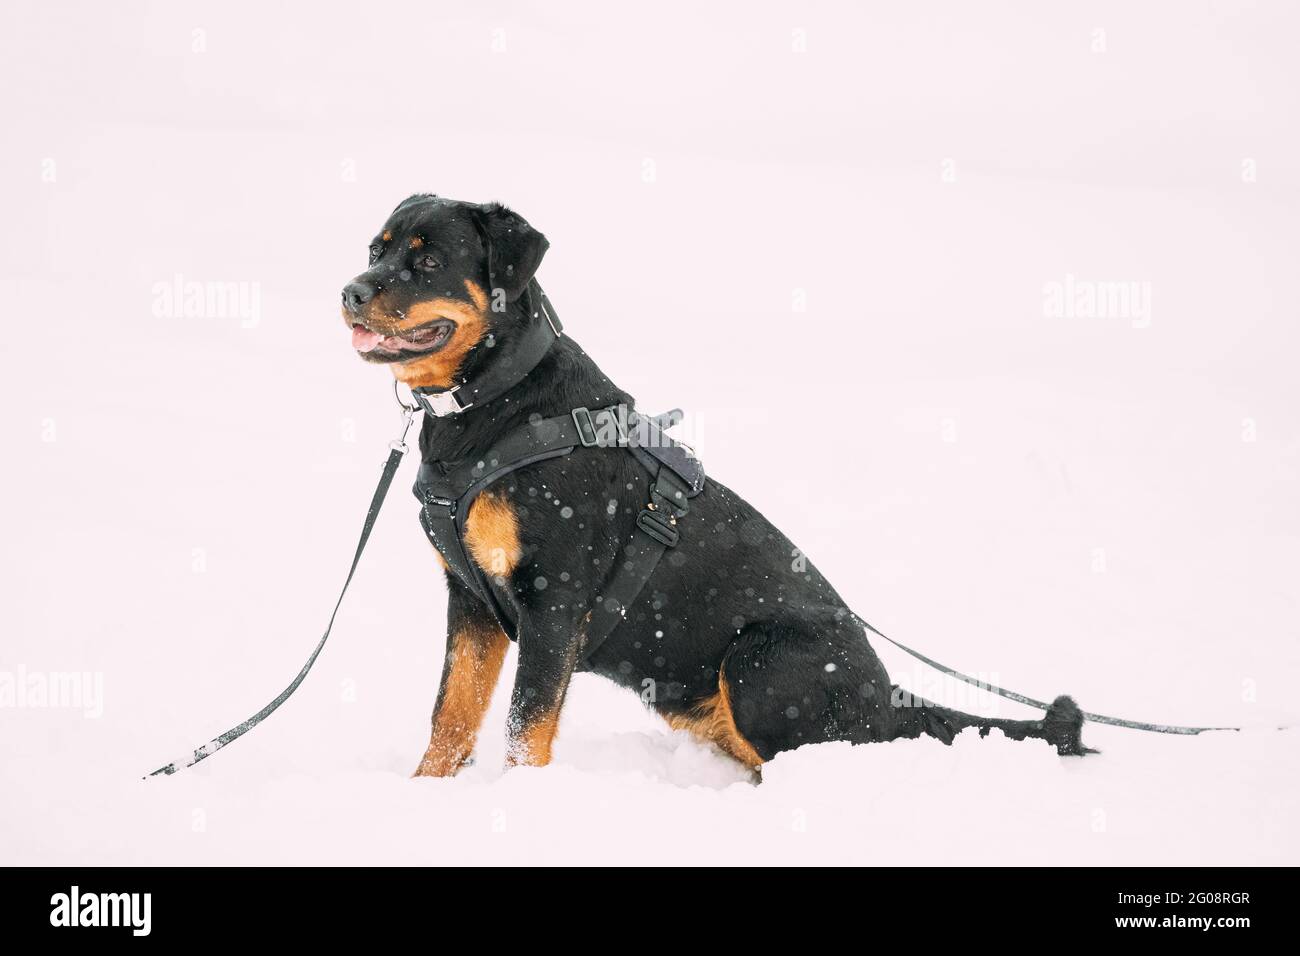 Black Rottweiler Metzgerhund Dog Sitting In Snow During Winter Day. Dog Is Dressed In A Special Training Suit Stock Photo